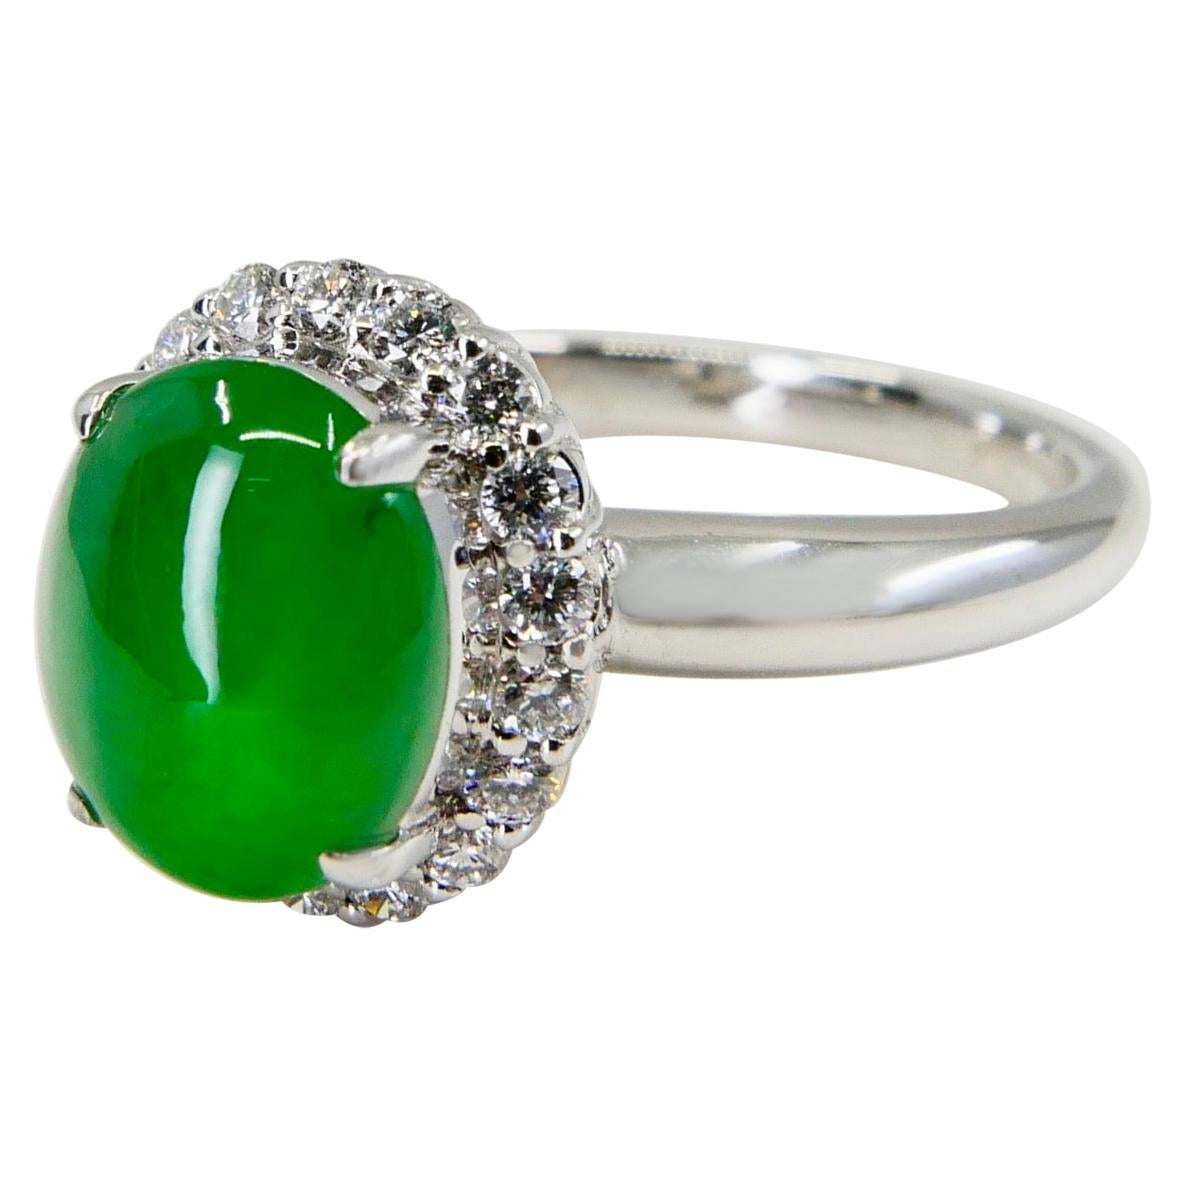 Certified Type A Jadeite Jade and Diamond Cocktail Ring, Close to Imperial Jade